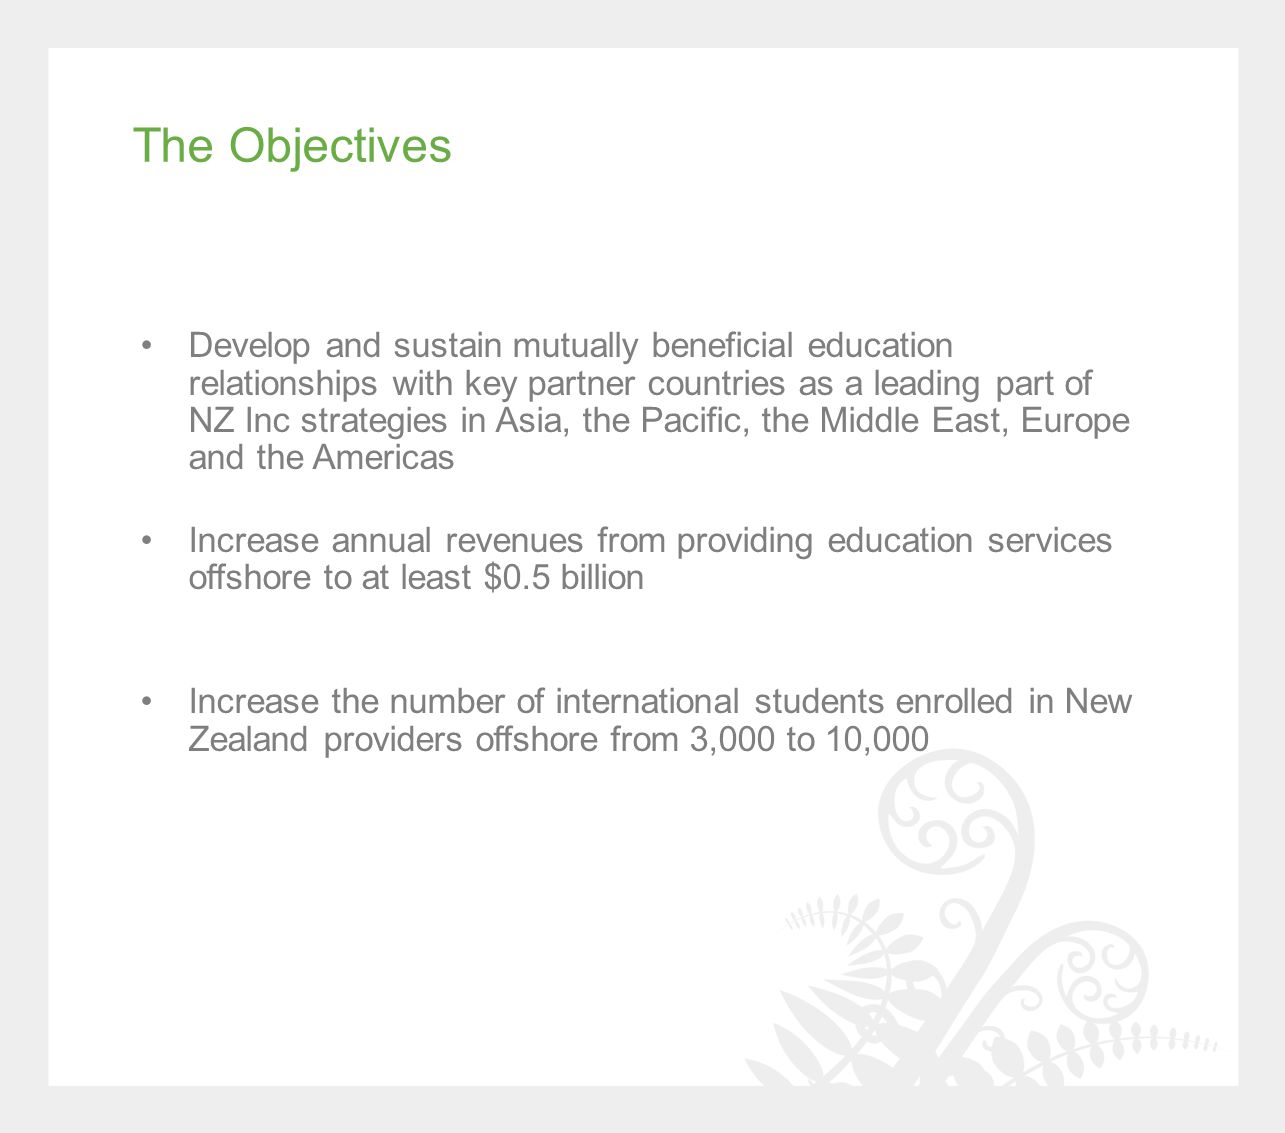 The Objectives Develop and sustain mutually beneficial education relationships with key partner countries as a leading part of NZ Inc strategies in Asia, the Pacific, the Middle East, Europe and the Americas Increase annual revenues from providing education services offshore to at least $0.5 billion Increase the number of international students enrolled in New Zealand providers offshore from 3,000 to 10,000